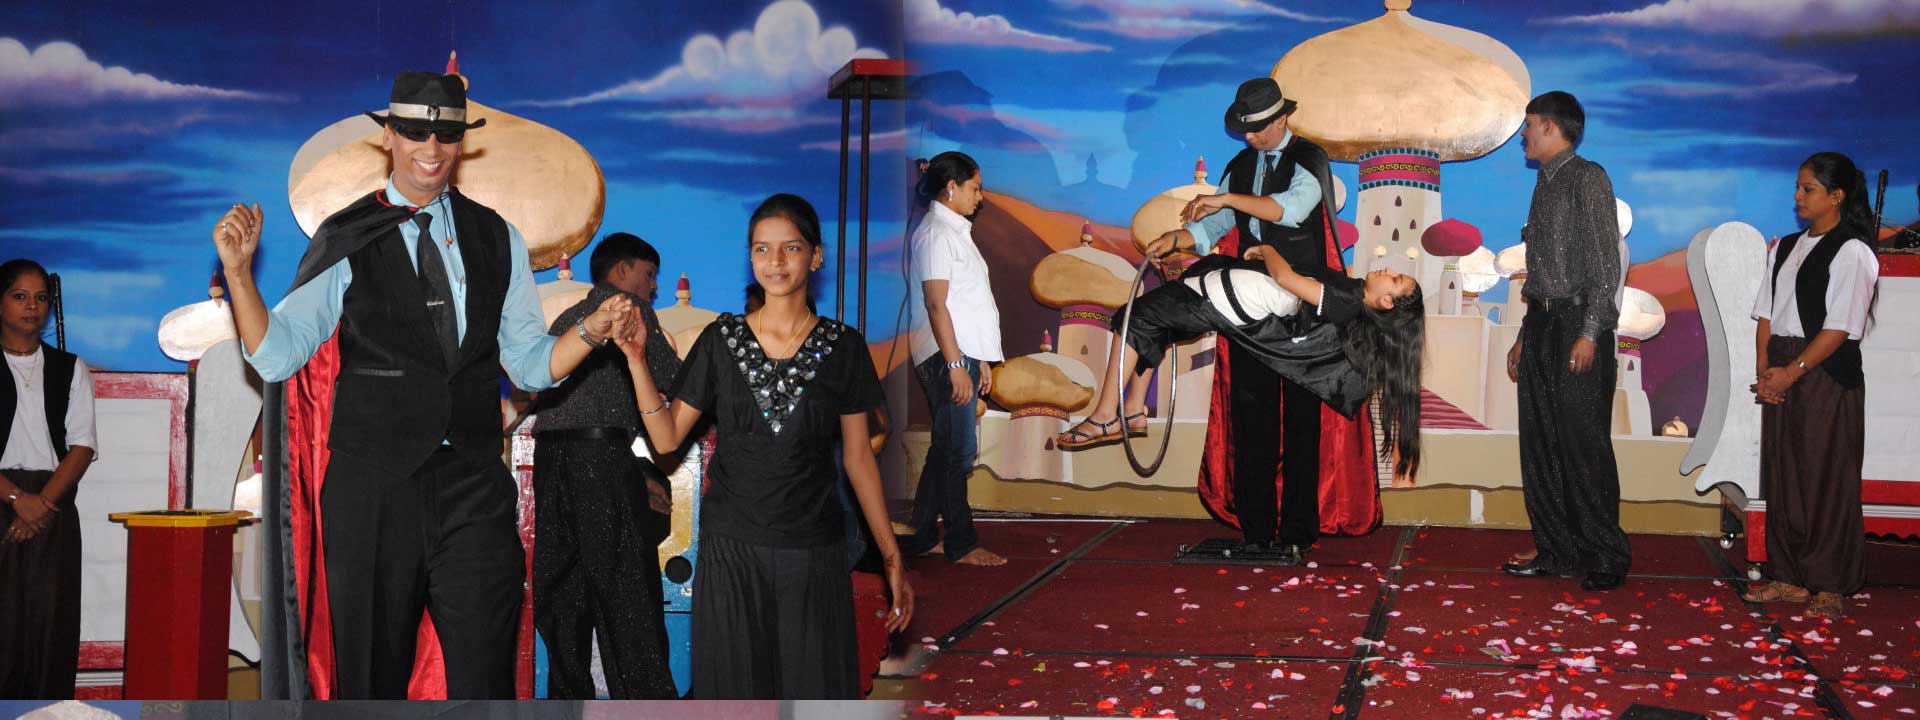 MAGICIAN KG AND COMPANY EVENT MANAGEMENT & DECOR